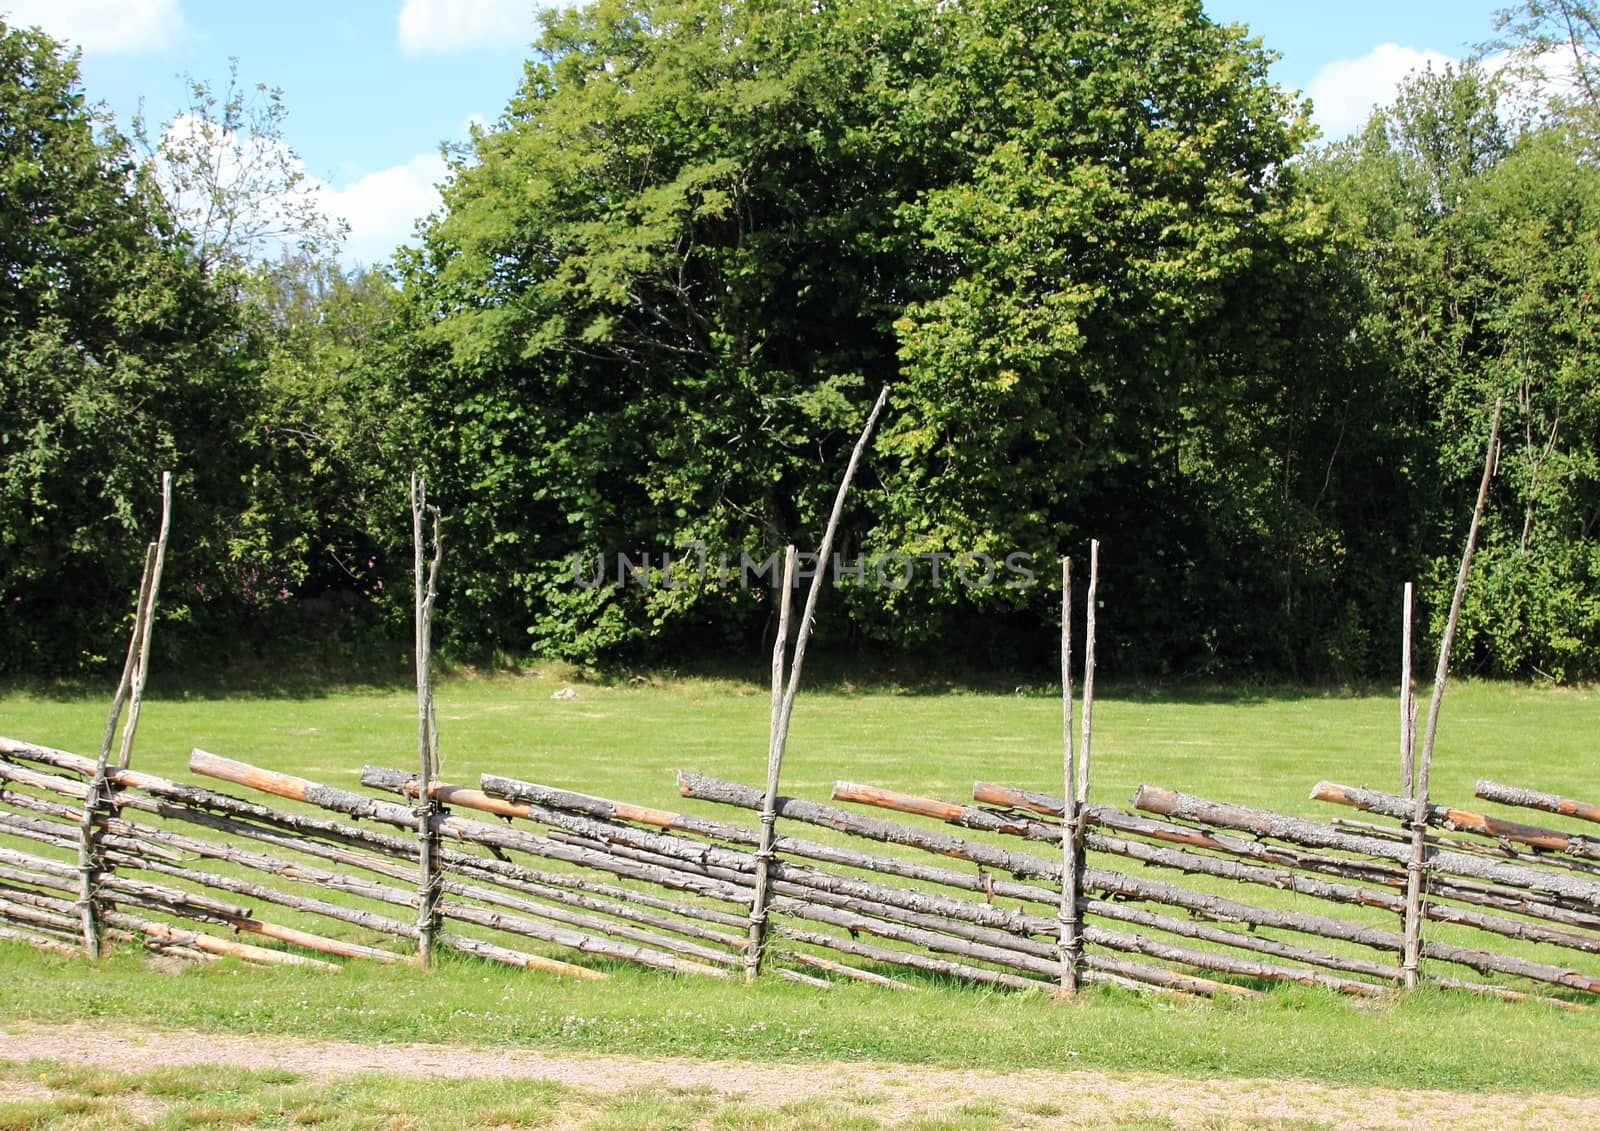 Rural simple wooden fence at hay field